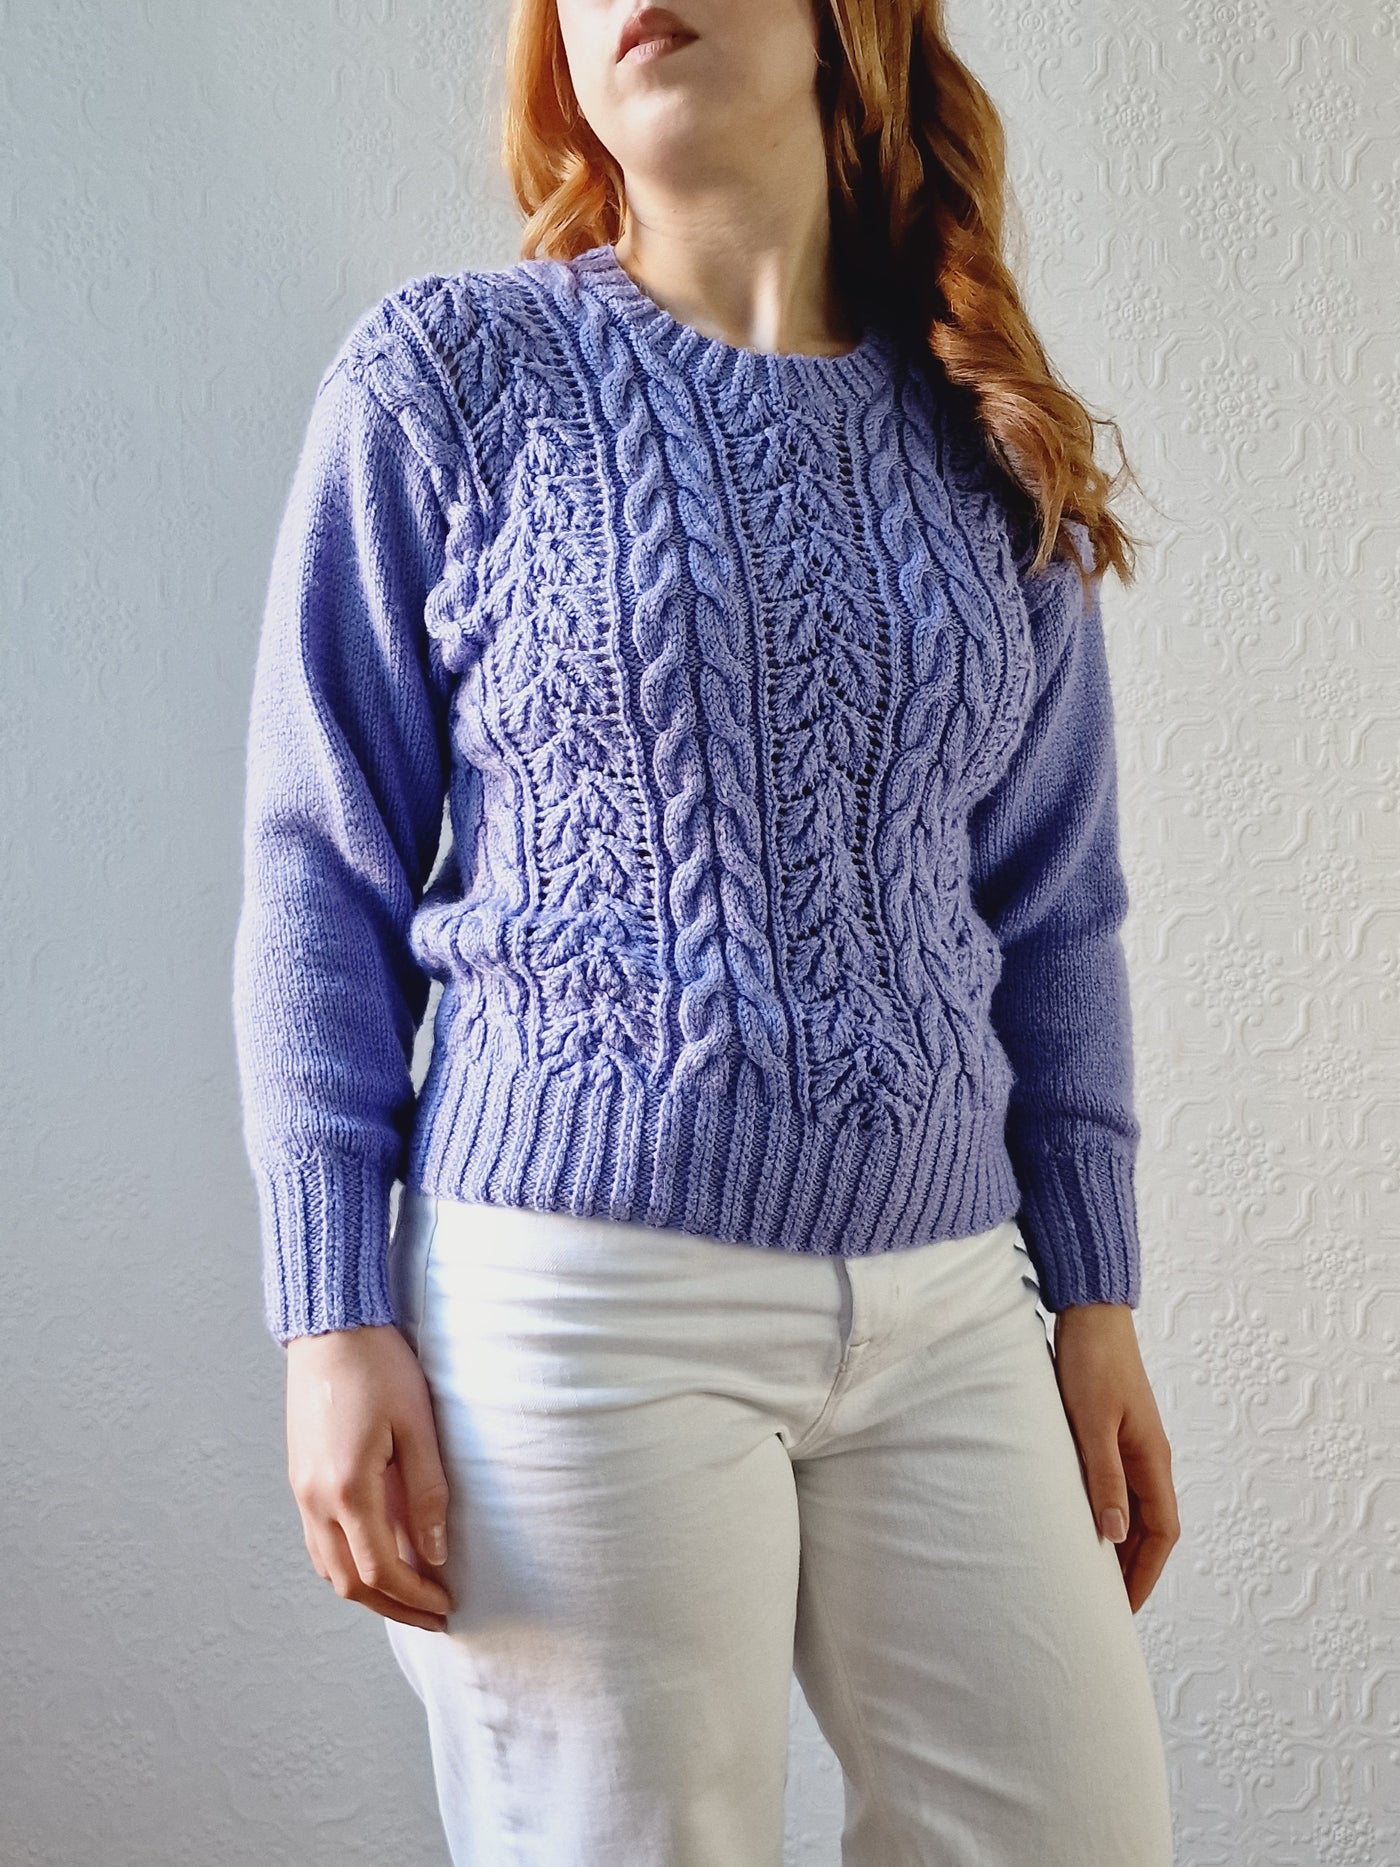 Vintage 80s Handknitted Lavender Purple Cable Knit Jumper with Crew Neck - S/M